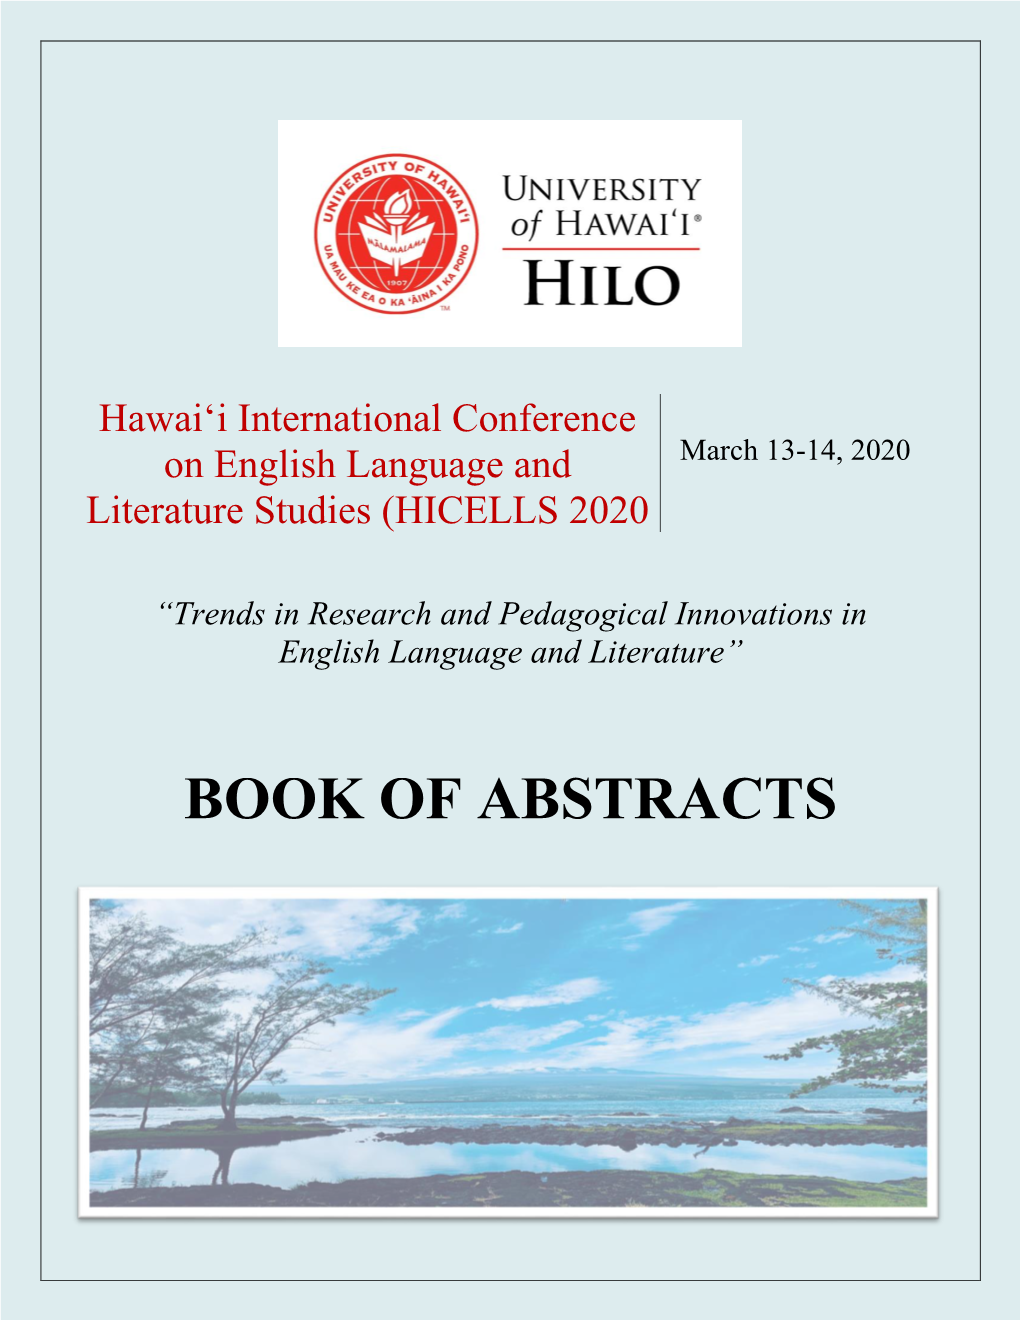 HICELLS 2020 Book of Abstracts